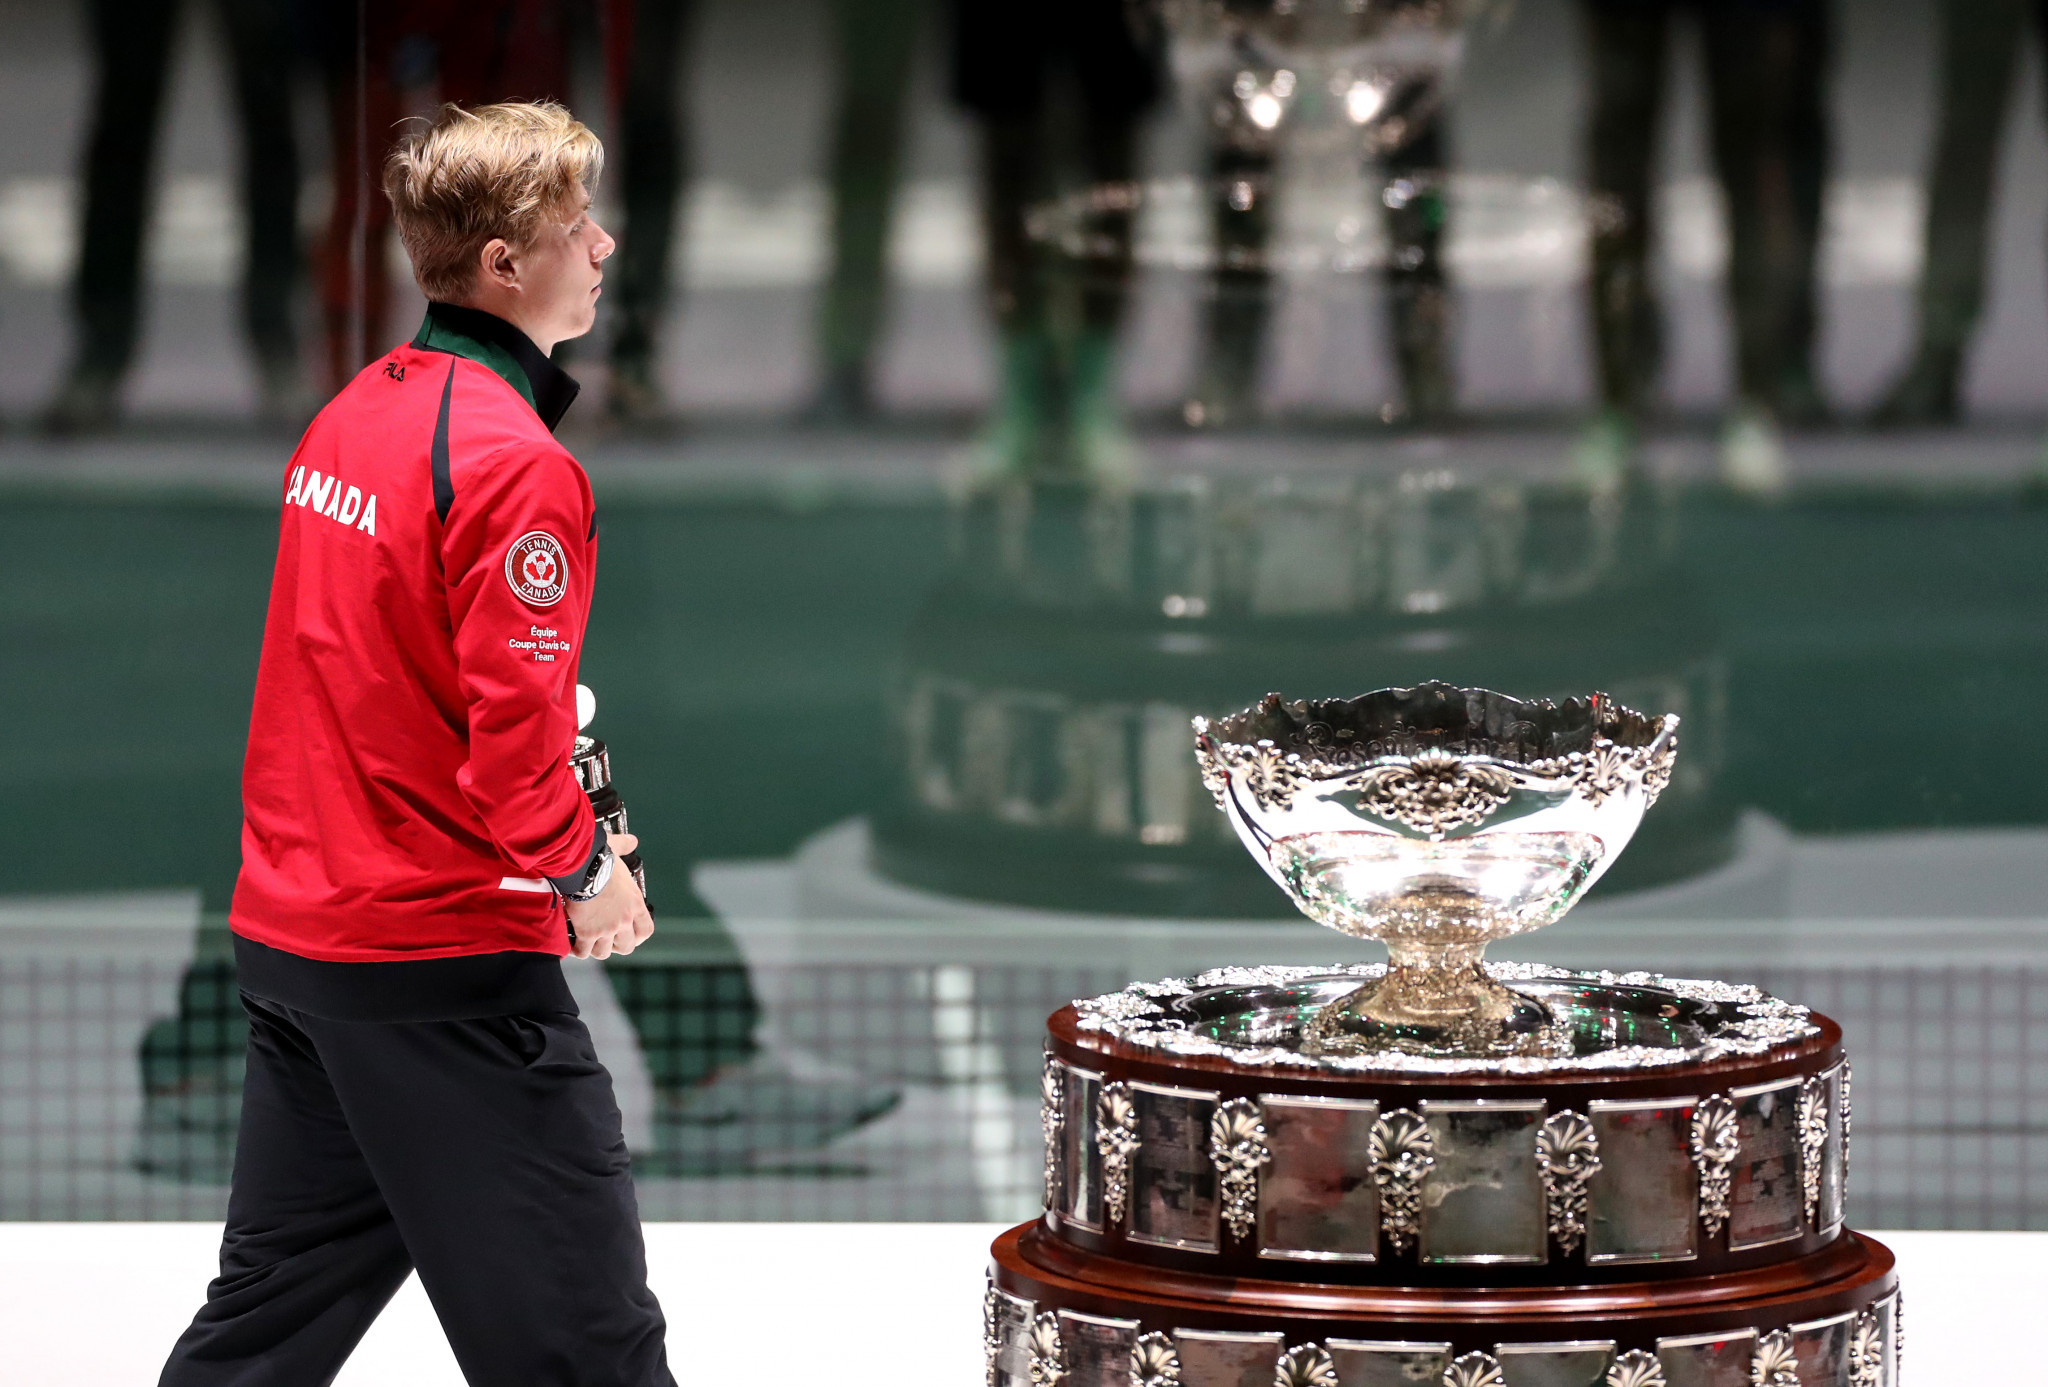 The 2020 Davis Cup Finals will now take place in 2021 ©Getty Images